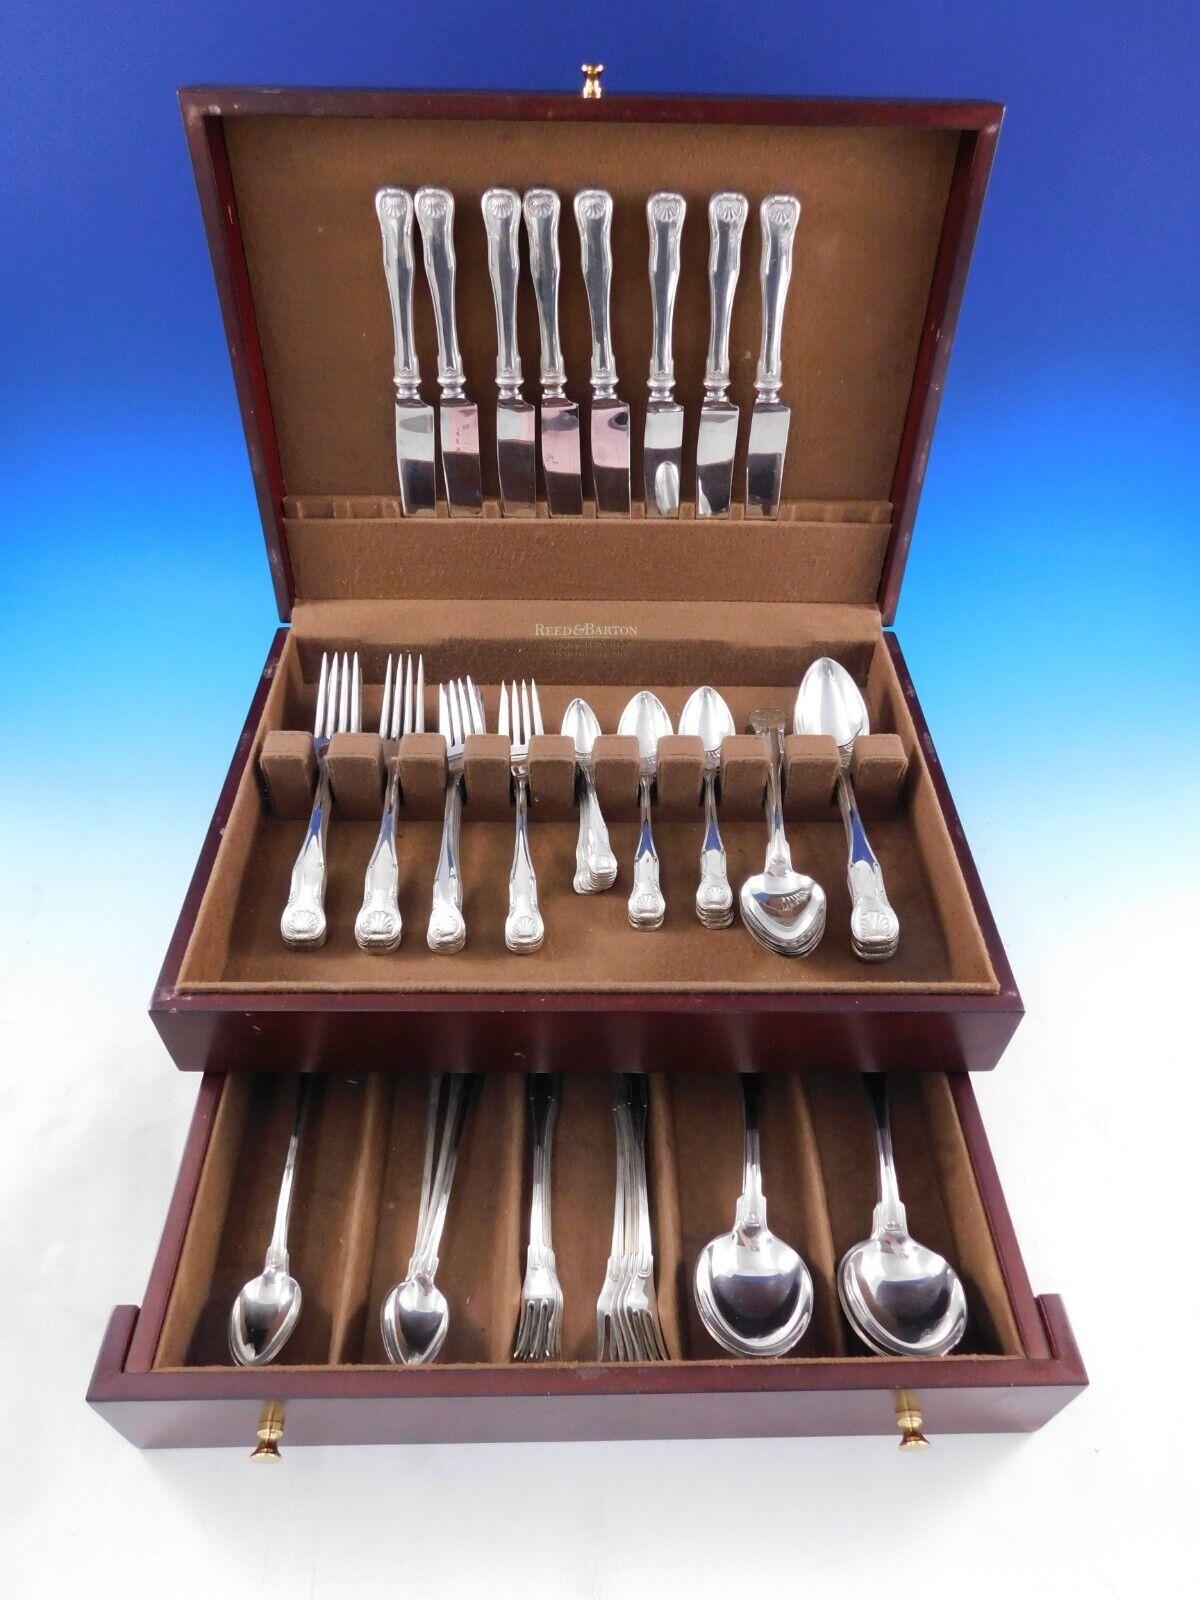 King by Kirk-Stieff Sterling Silver Flatware set - 72 pieces. Kirk-Stieff's version of the traditional Kings-style places its emphasis on simplicity of design, and features an iconic shell motif. This set includes:

8 Knives w/ stainless blades, 8